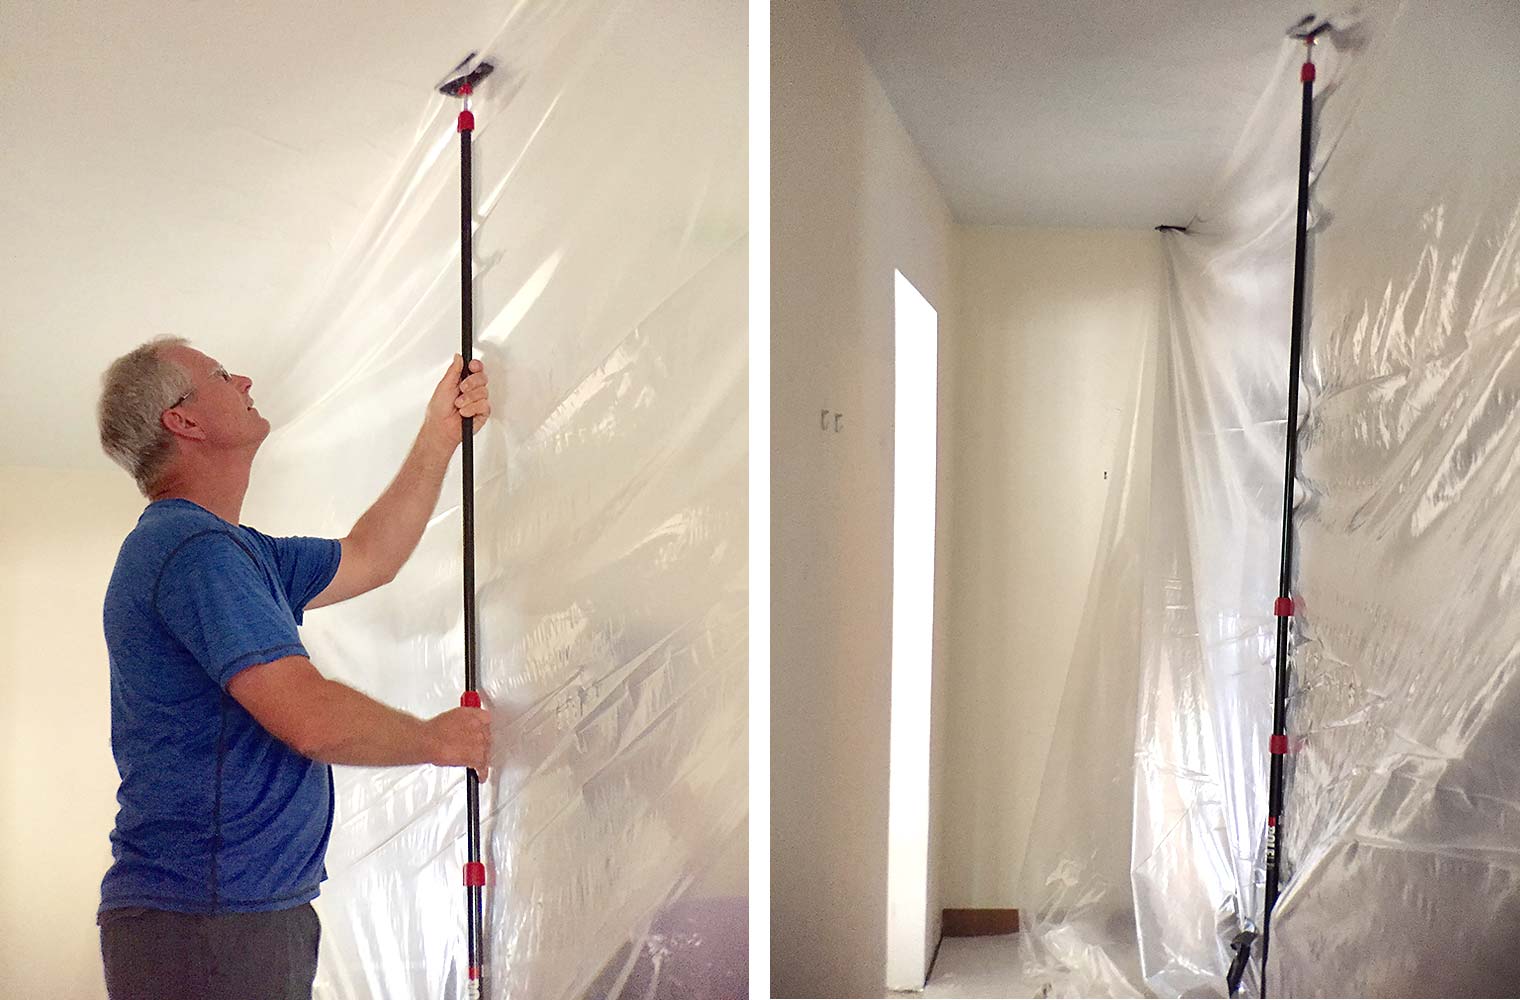 Craig Seagren of Silent Rivers Design+Build creates a zip wall for remodeling dust control while building an addition onto a West Des Moines home